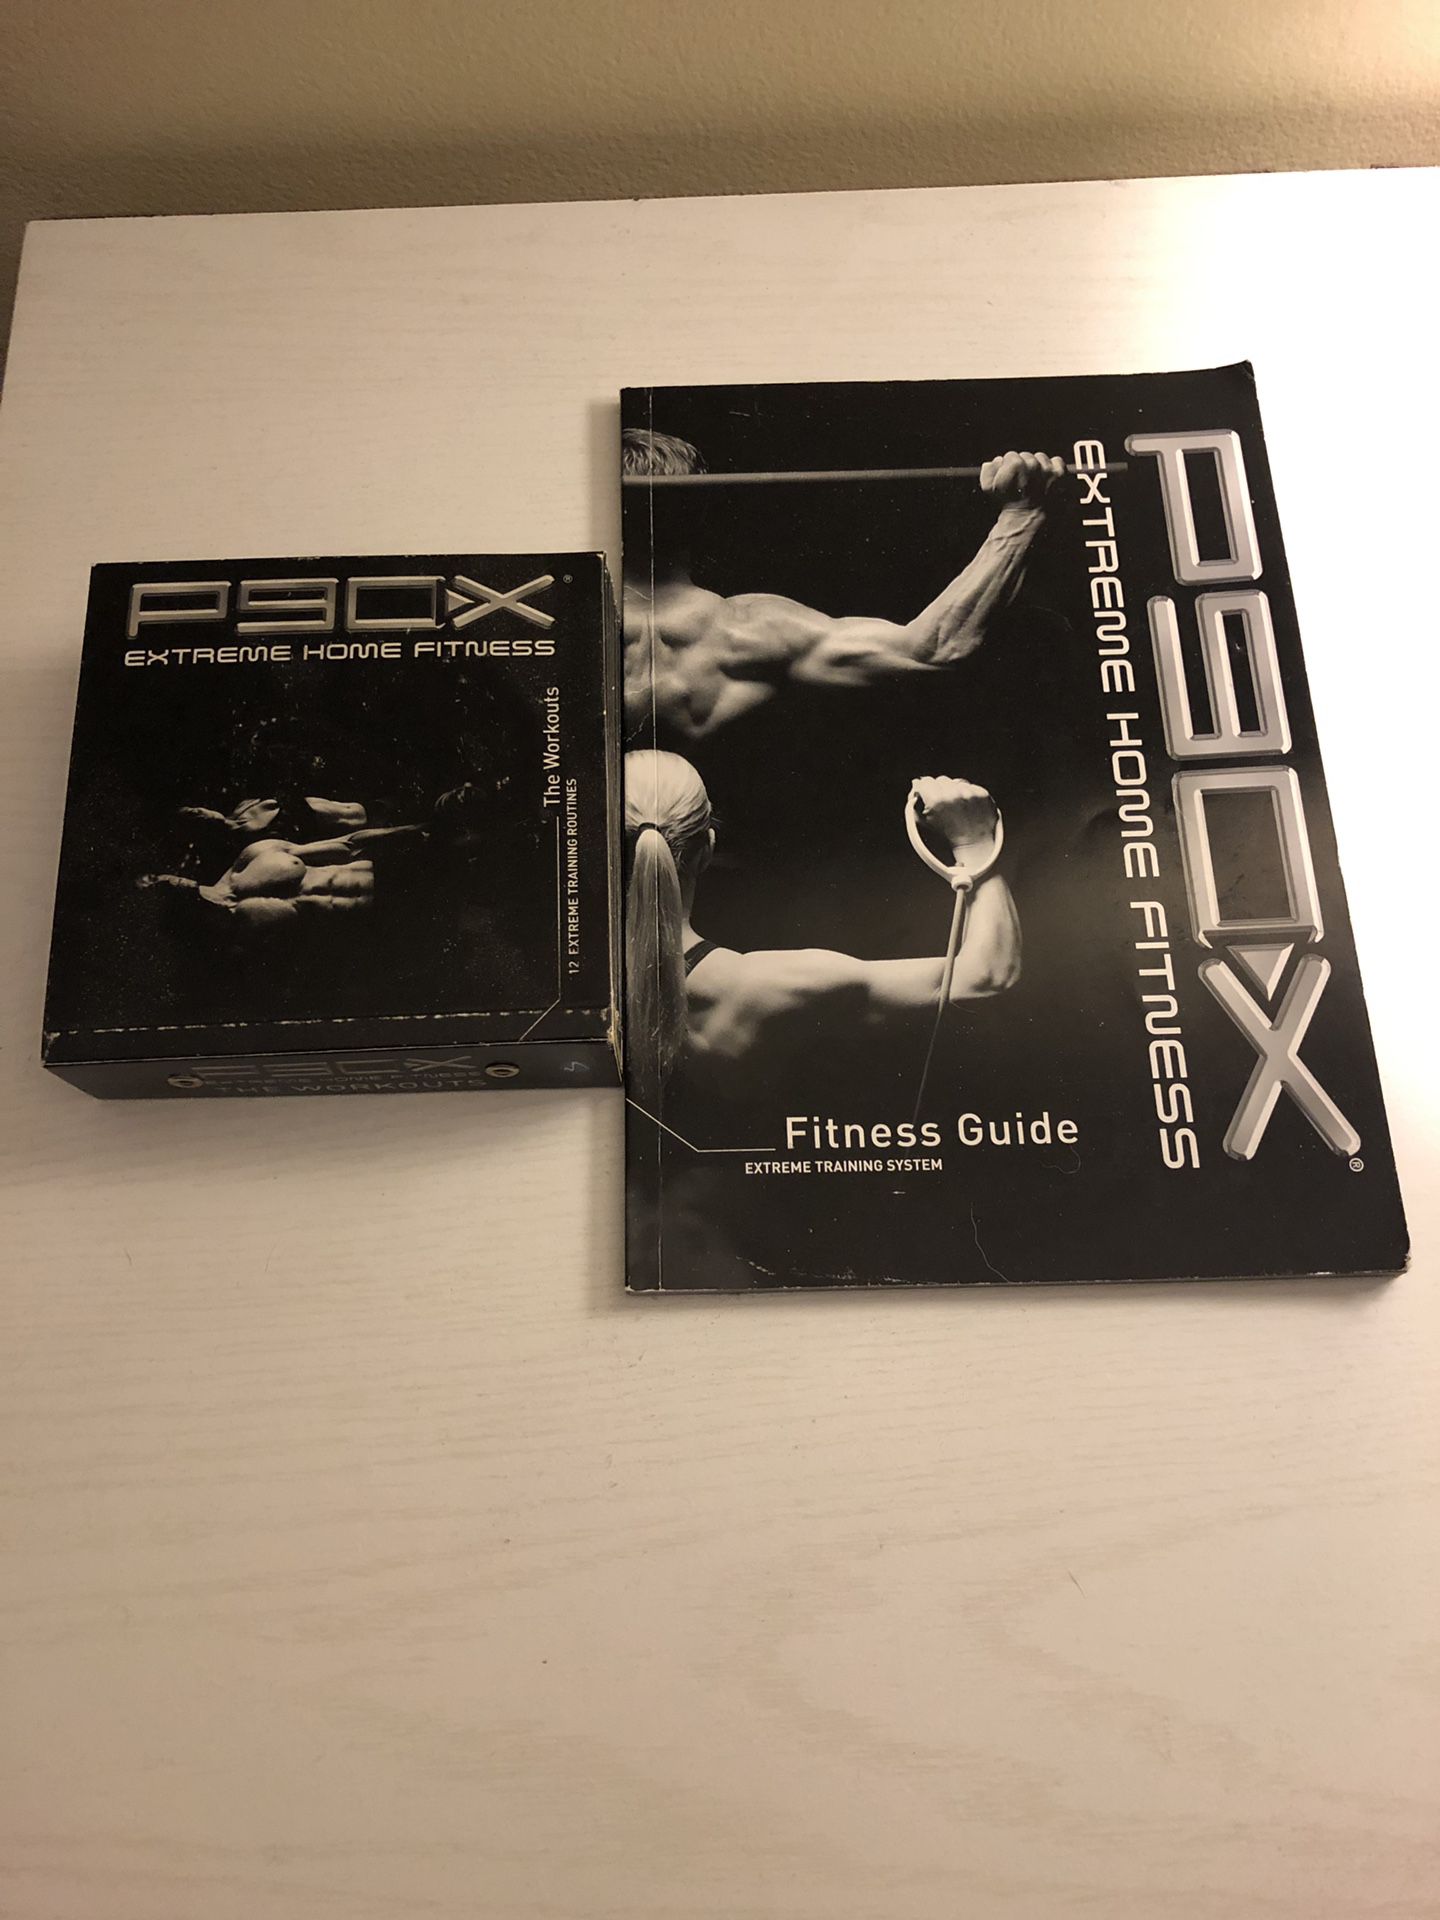 P90X DVDs and Fitness Guide